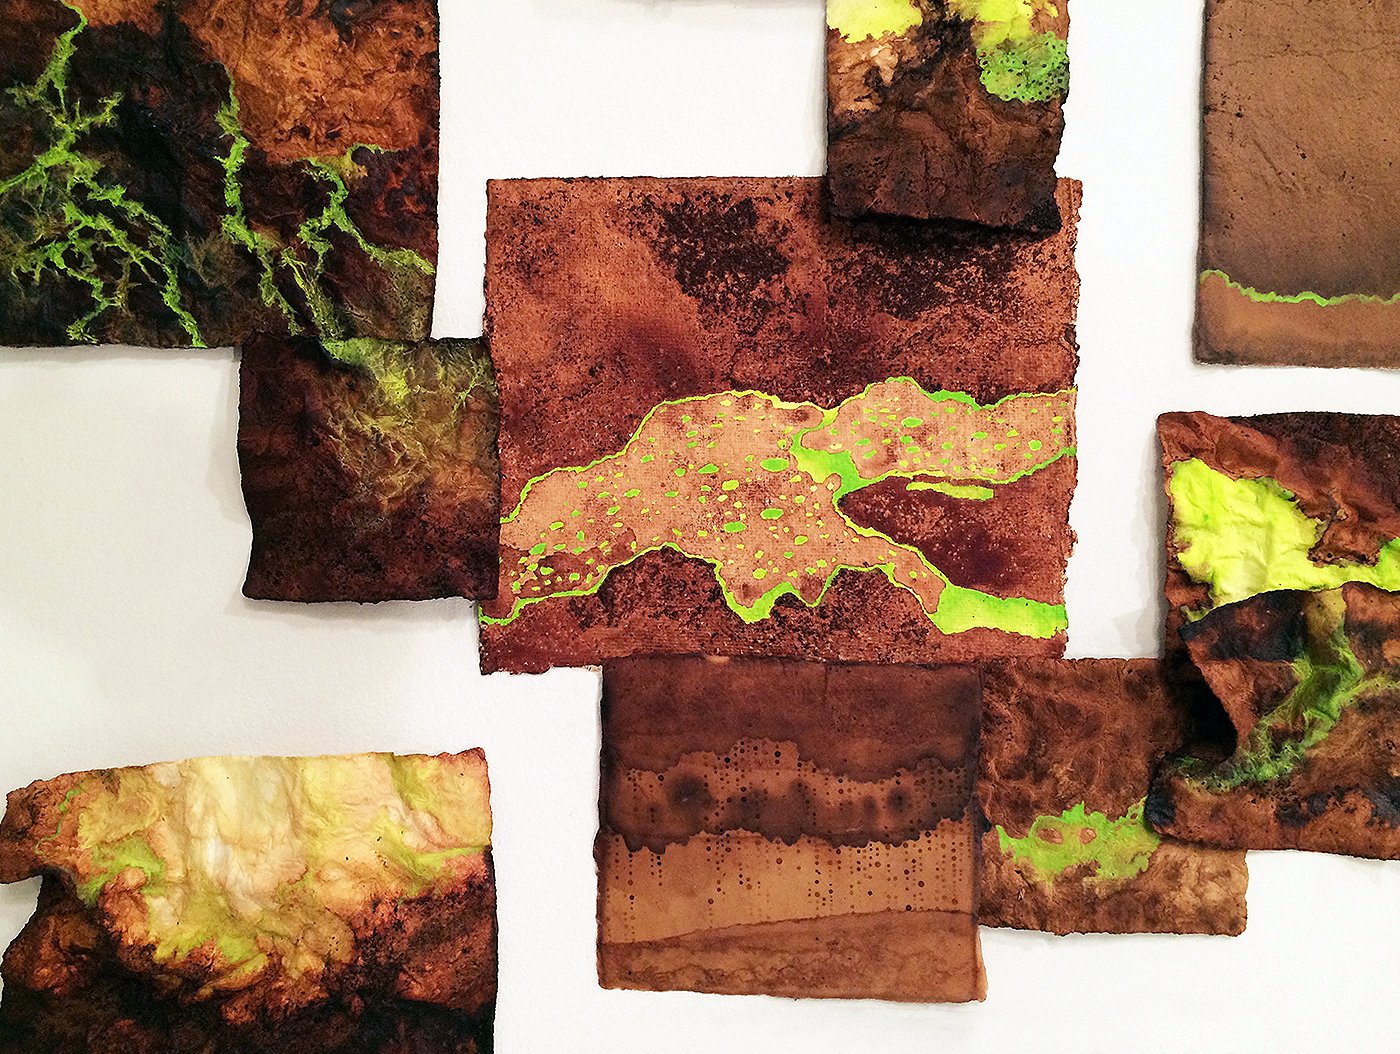    Beth Dary,    Detail “Bloom (installation)”,Egg tempera, tea, rust and encaustic on handmade paper, 5'h x 8'w x 1/2"d, 2015/2016, $5,500.00  